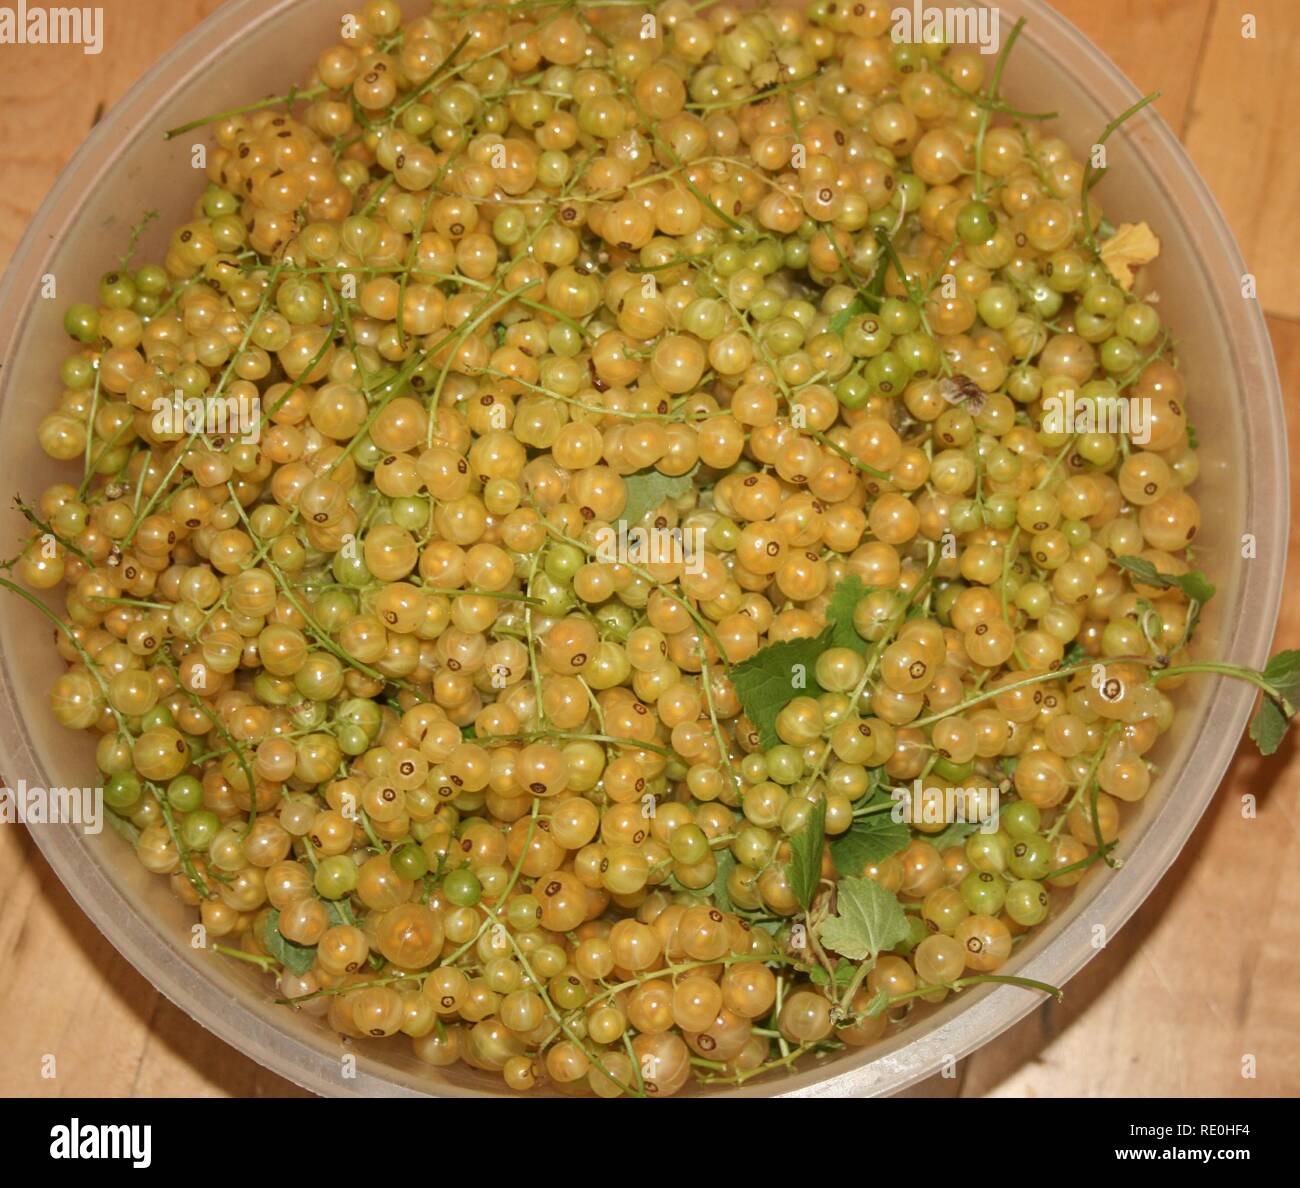 A Bowlful of White-currants Stock Photo